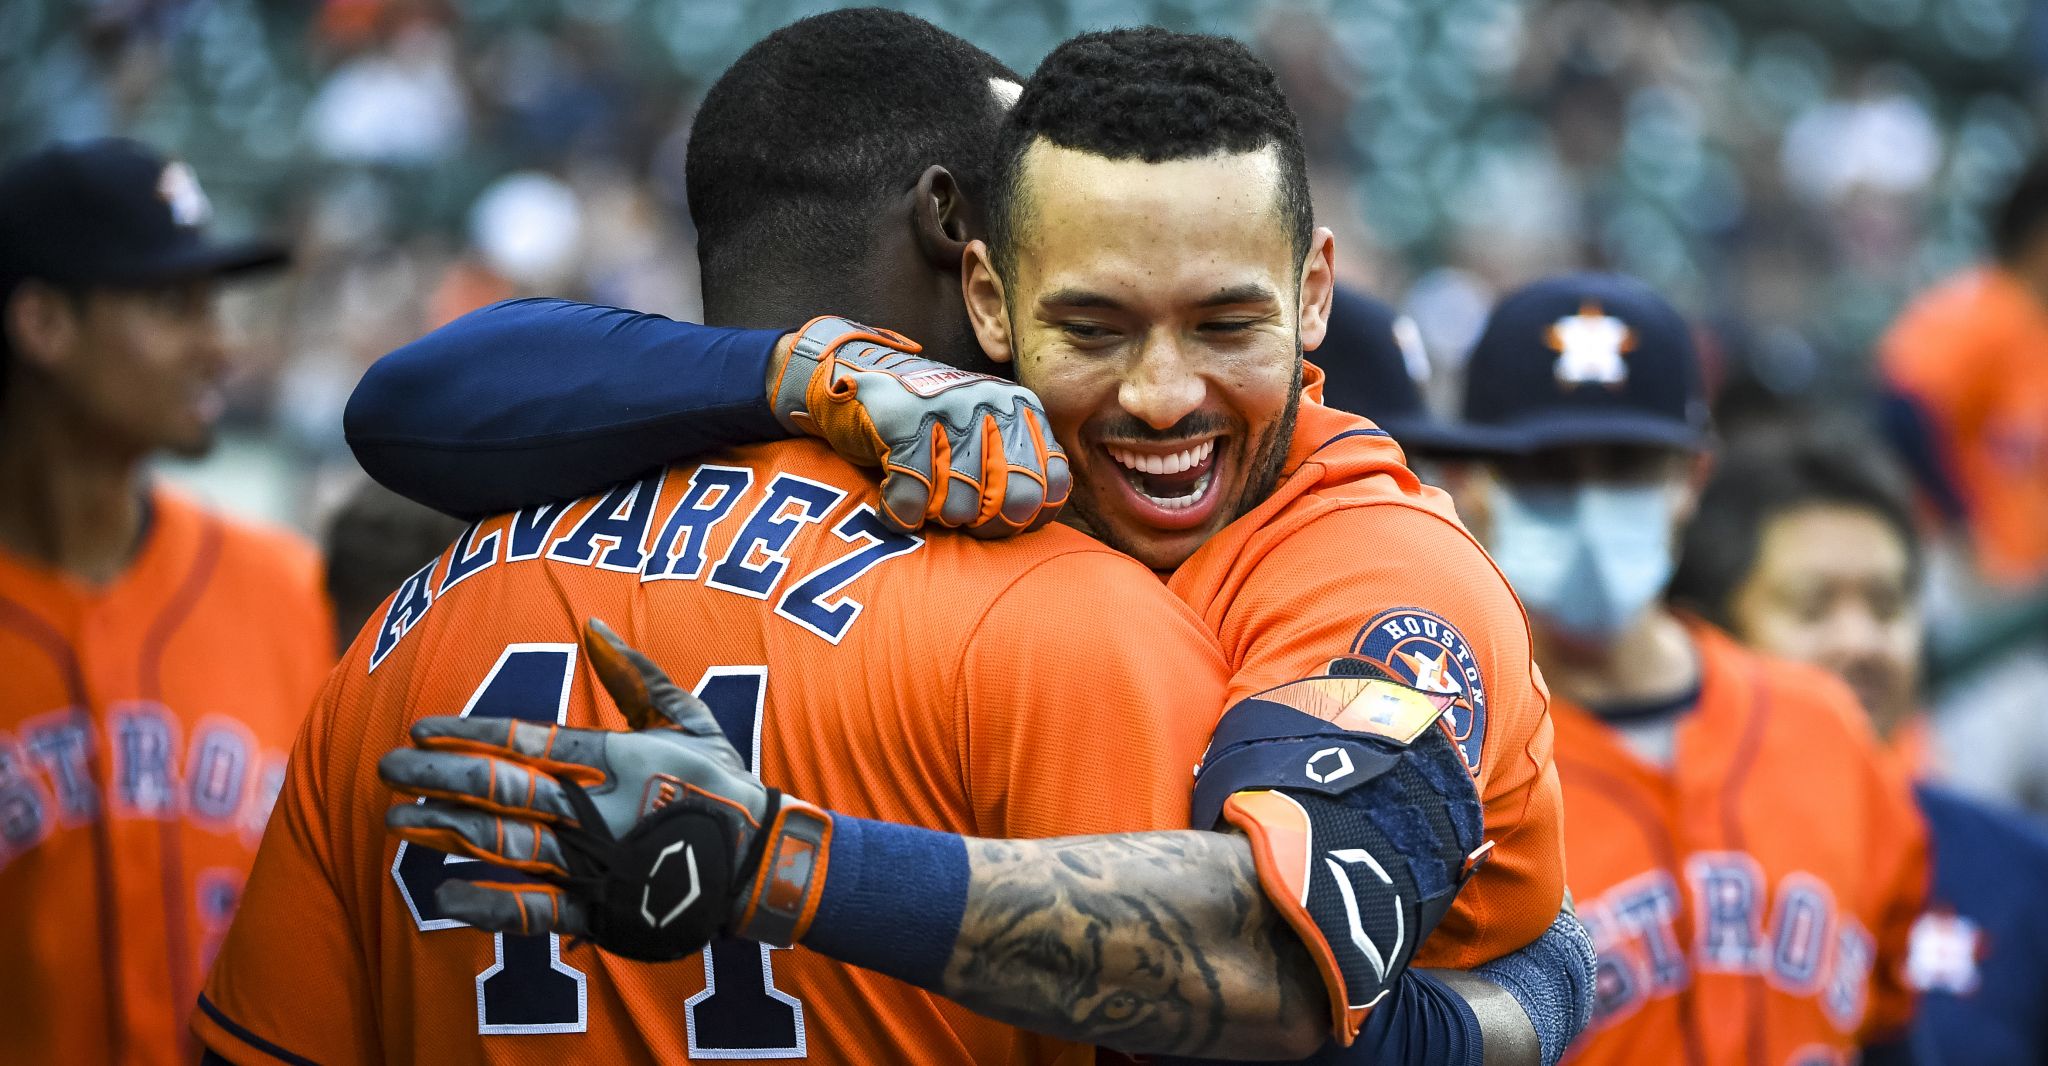 Tucker's RBI in 9th lifts Astros to 3-2 win over Tigers